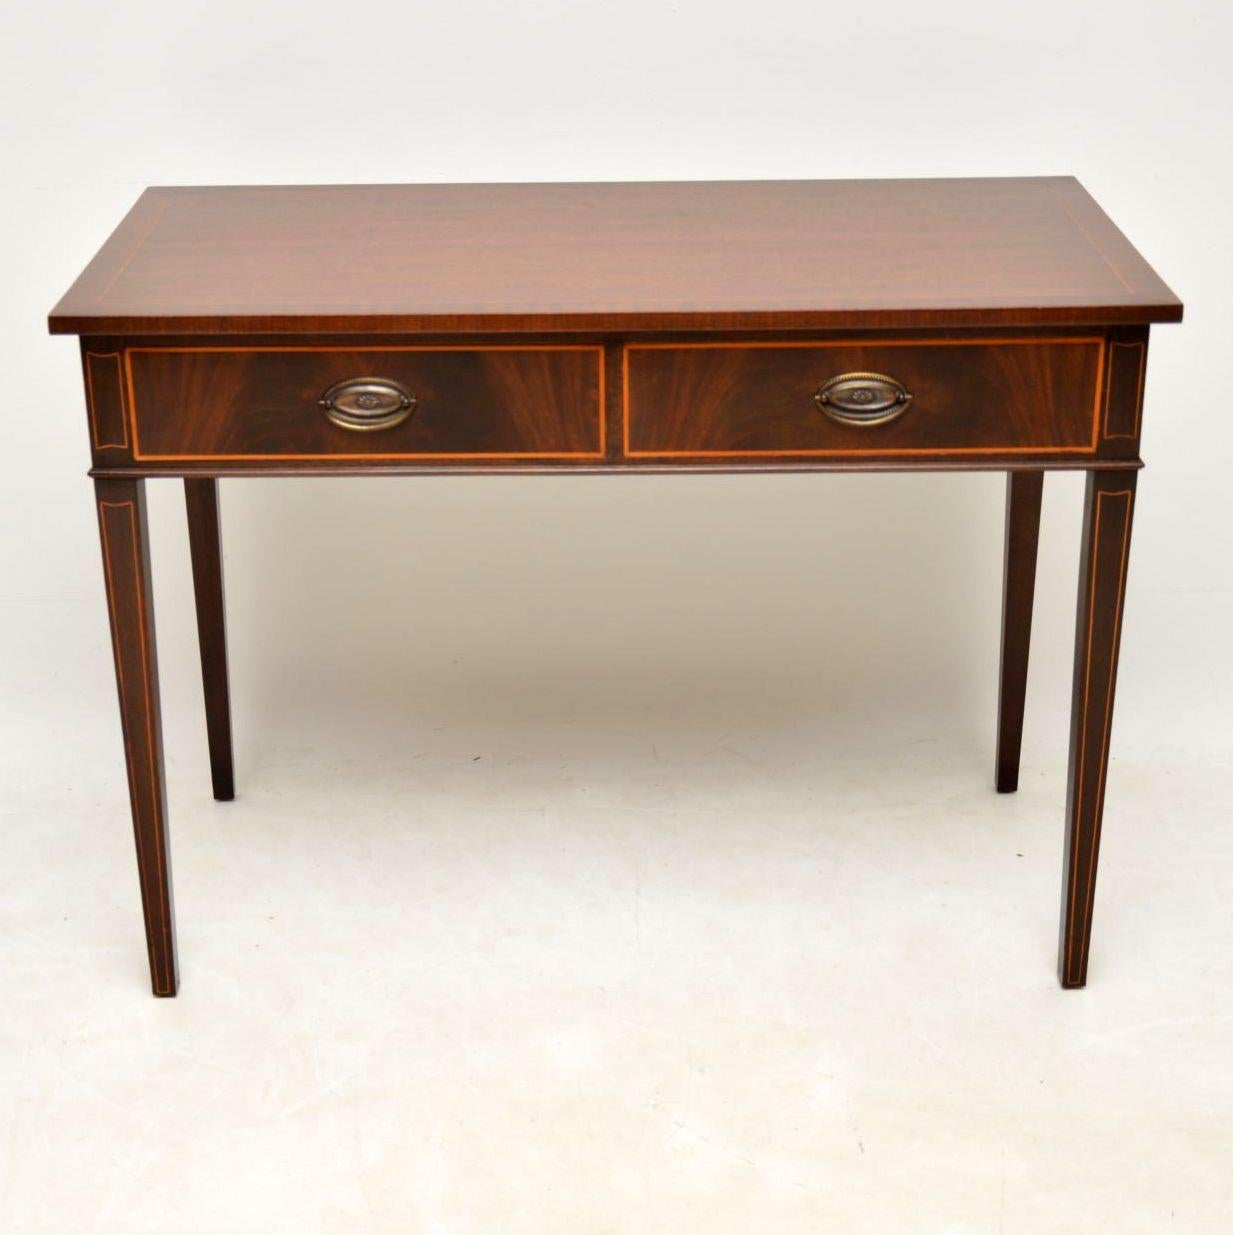 Antique Georgian style mahogany writing table or side table with fine satinwood inlays all-over. It’s in good condition, having just been French polished & dates from the circa 1930-1950s period. The polished mahogany top is inlaid & crossbanded.